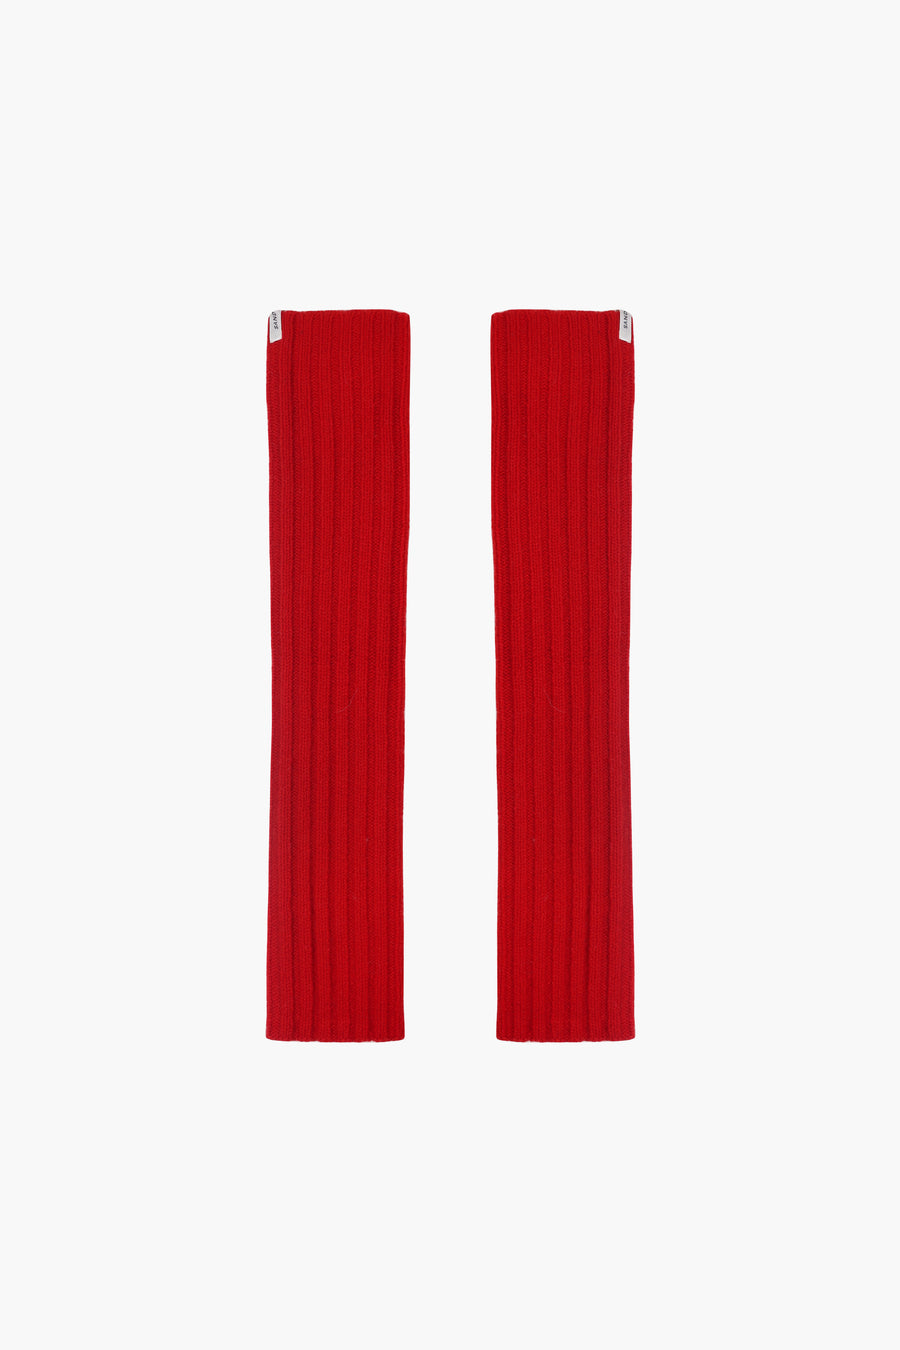 Knit arm warmers in flame red with thumbhole